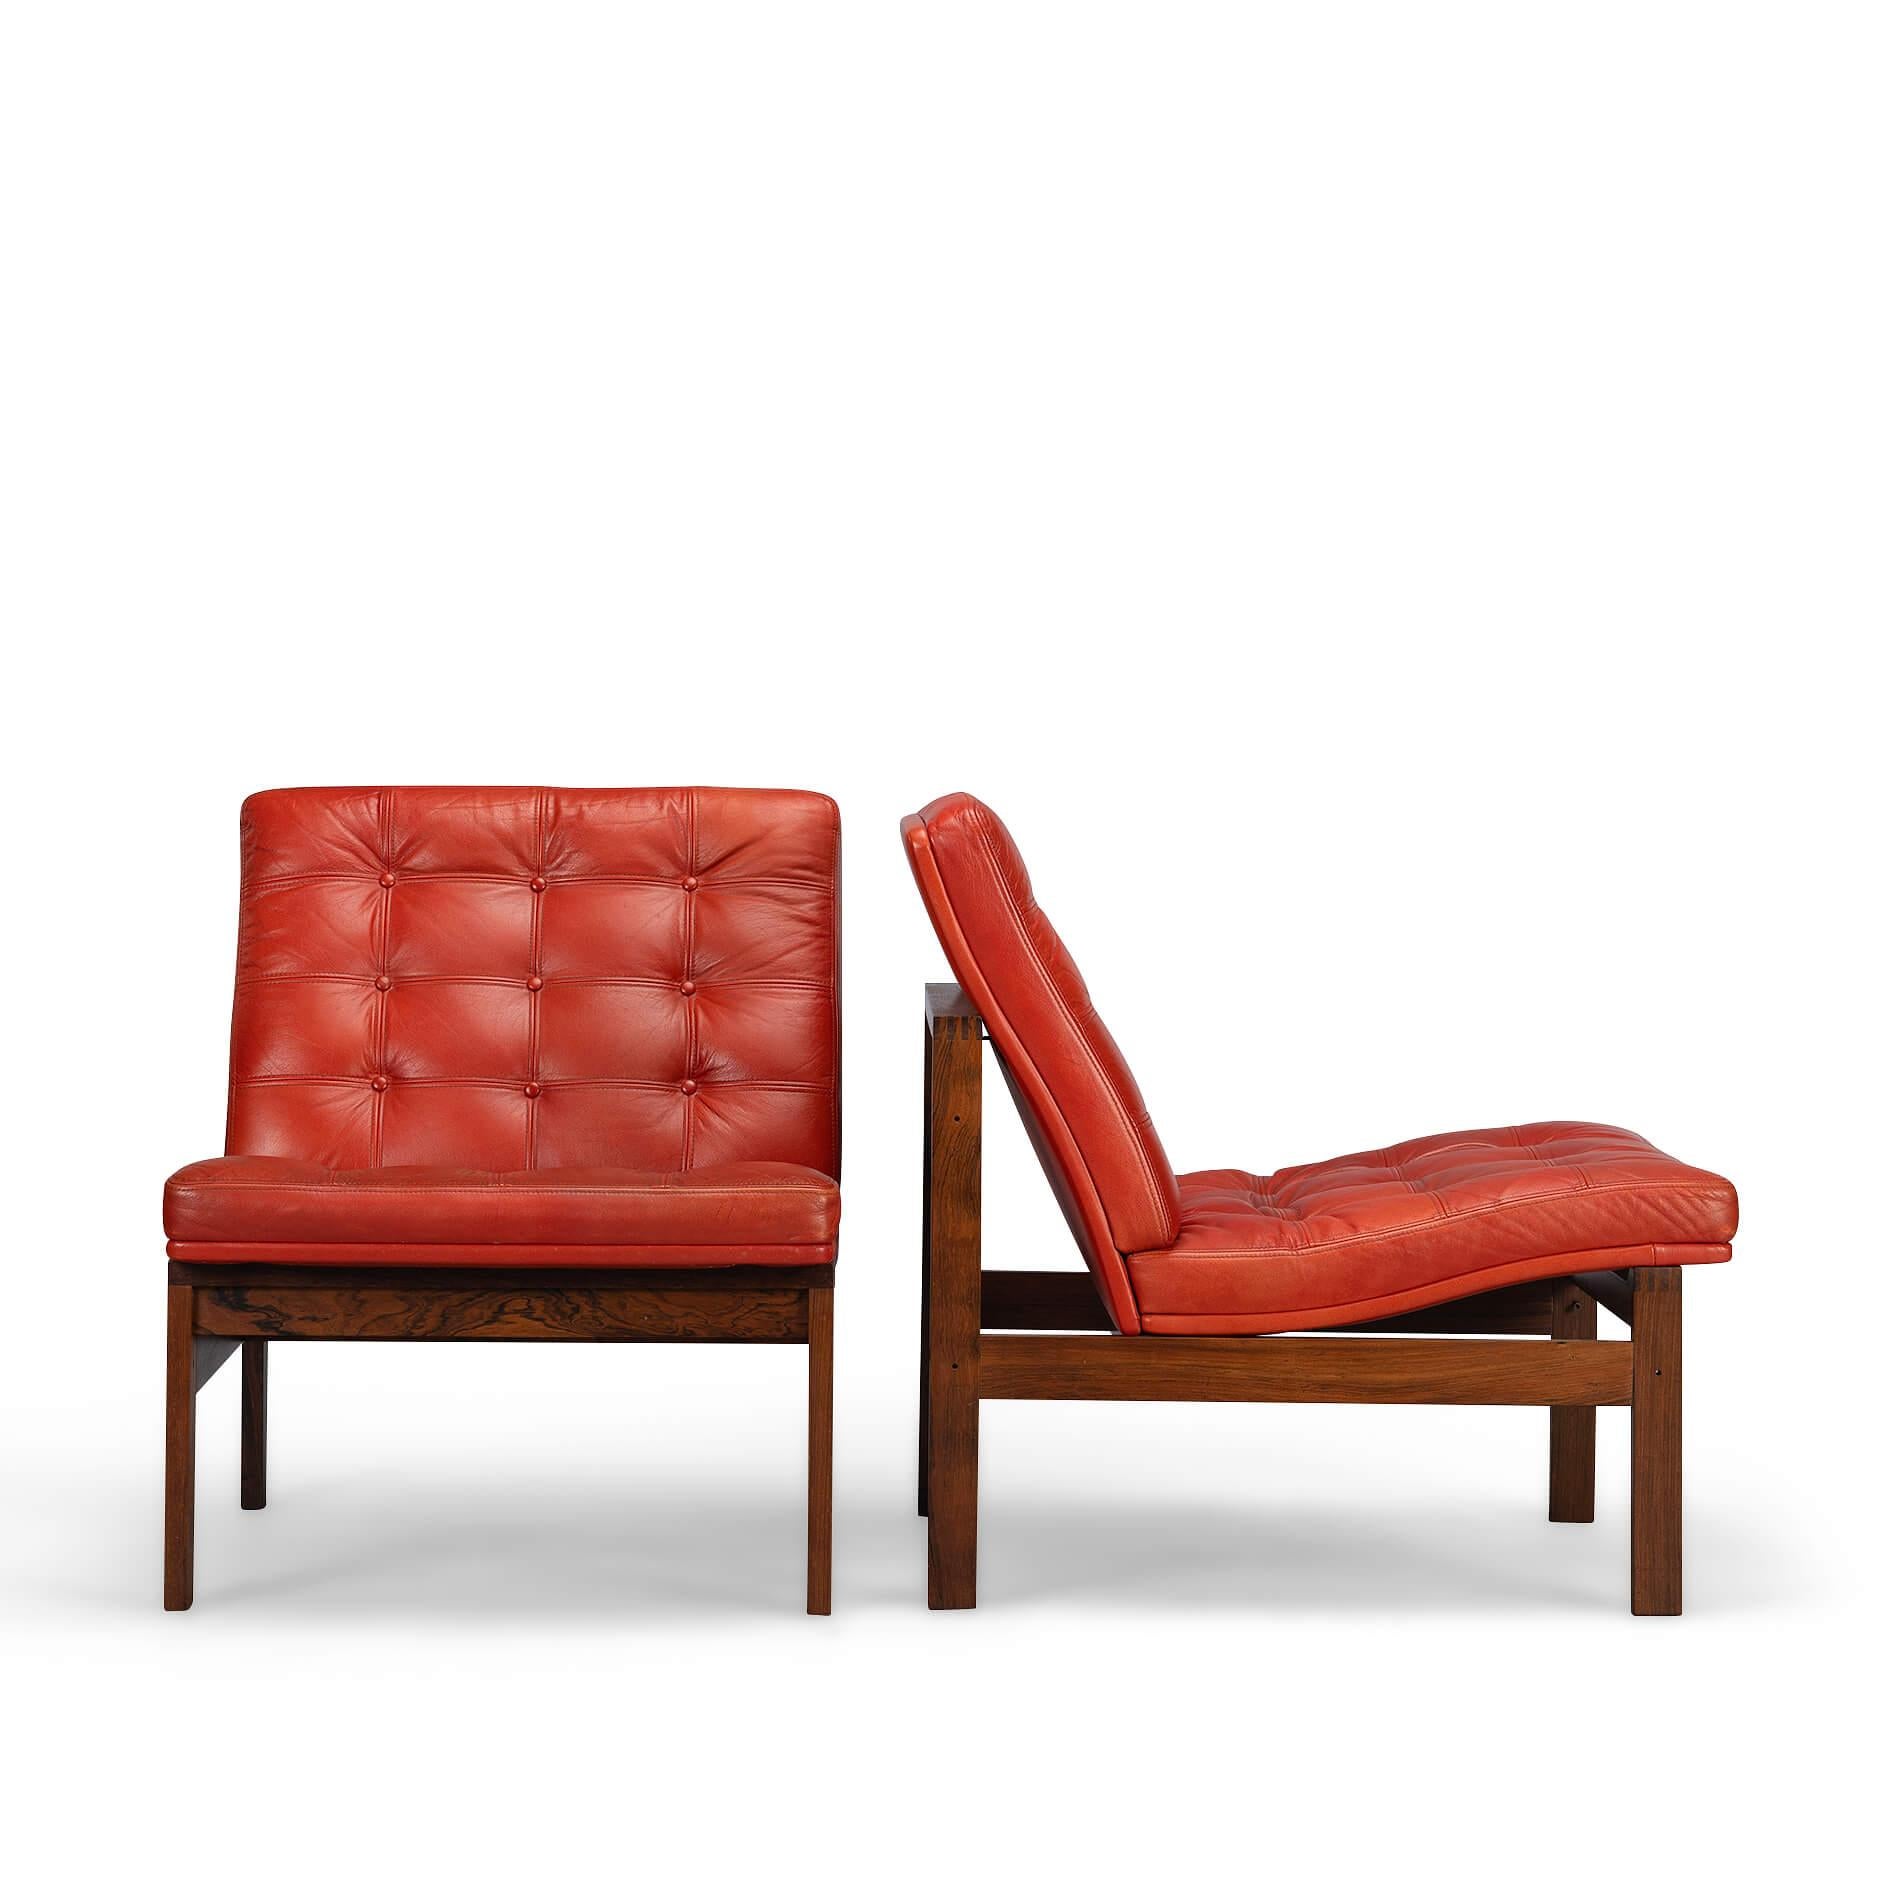 Danish Leather 'Moduline' Red Easy Chair Set with Table by Ole Gjerlov-Knudsen, 1962 For Sale